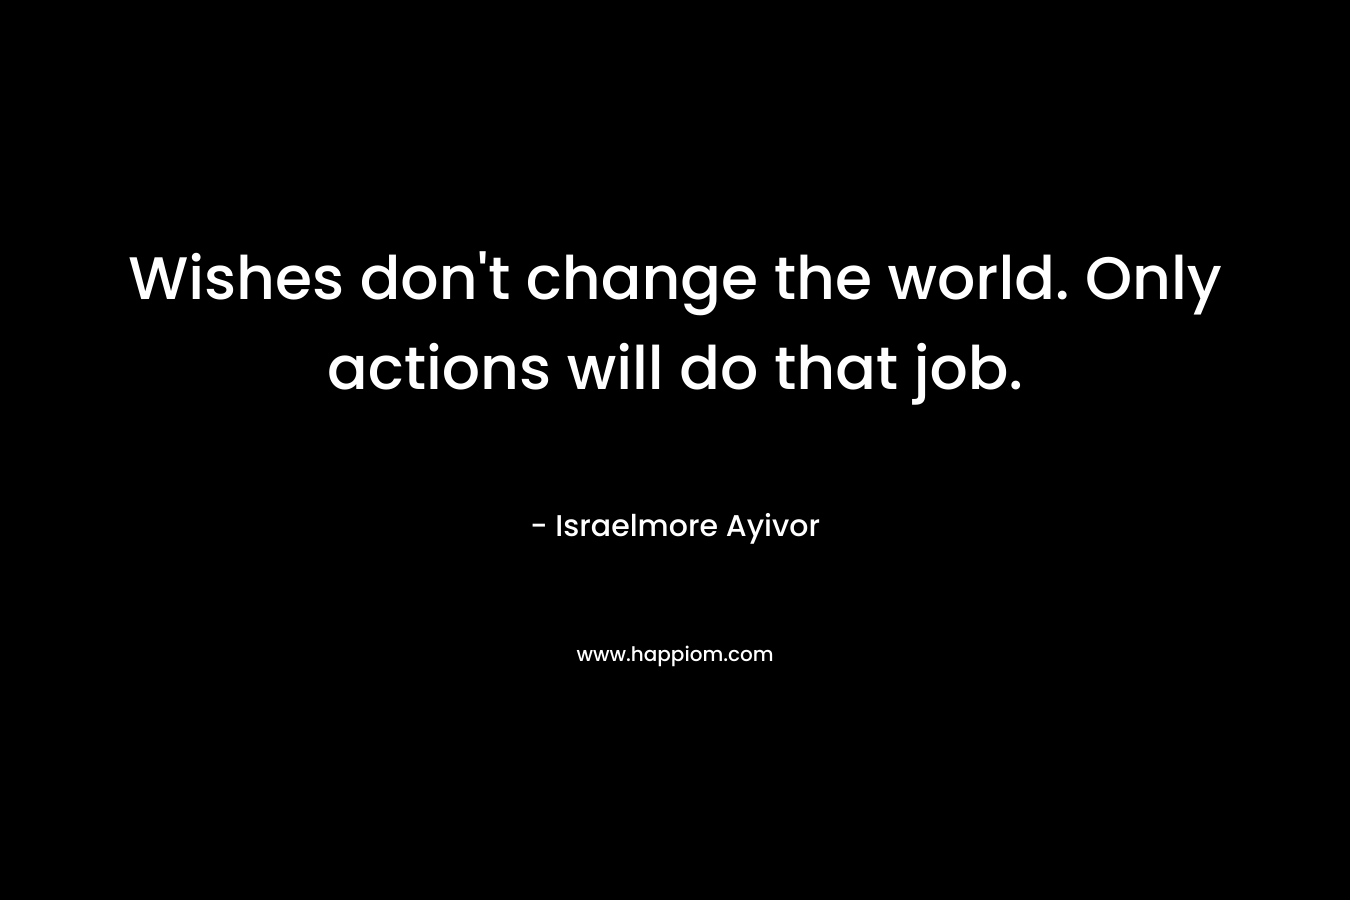 Wishes don't change the world. Only actions will do that job.